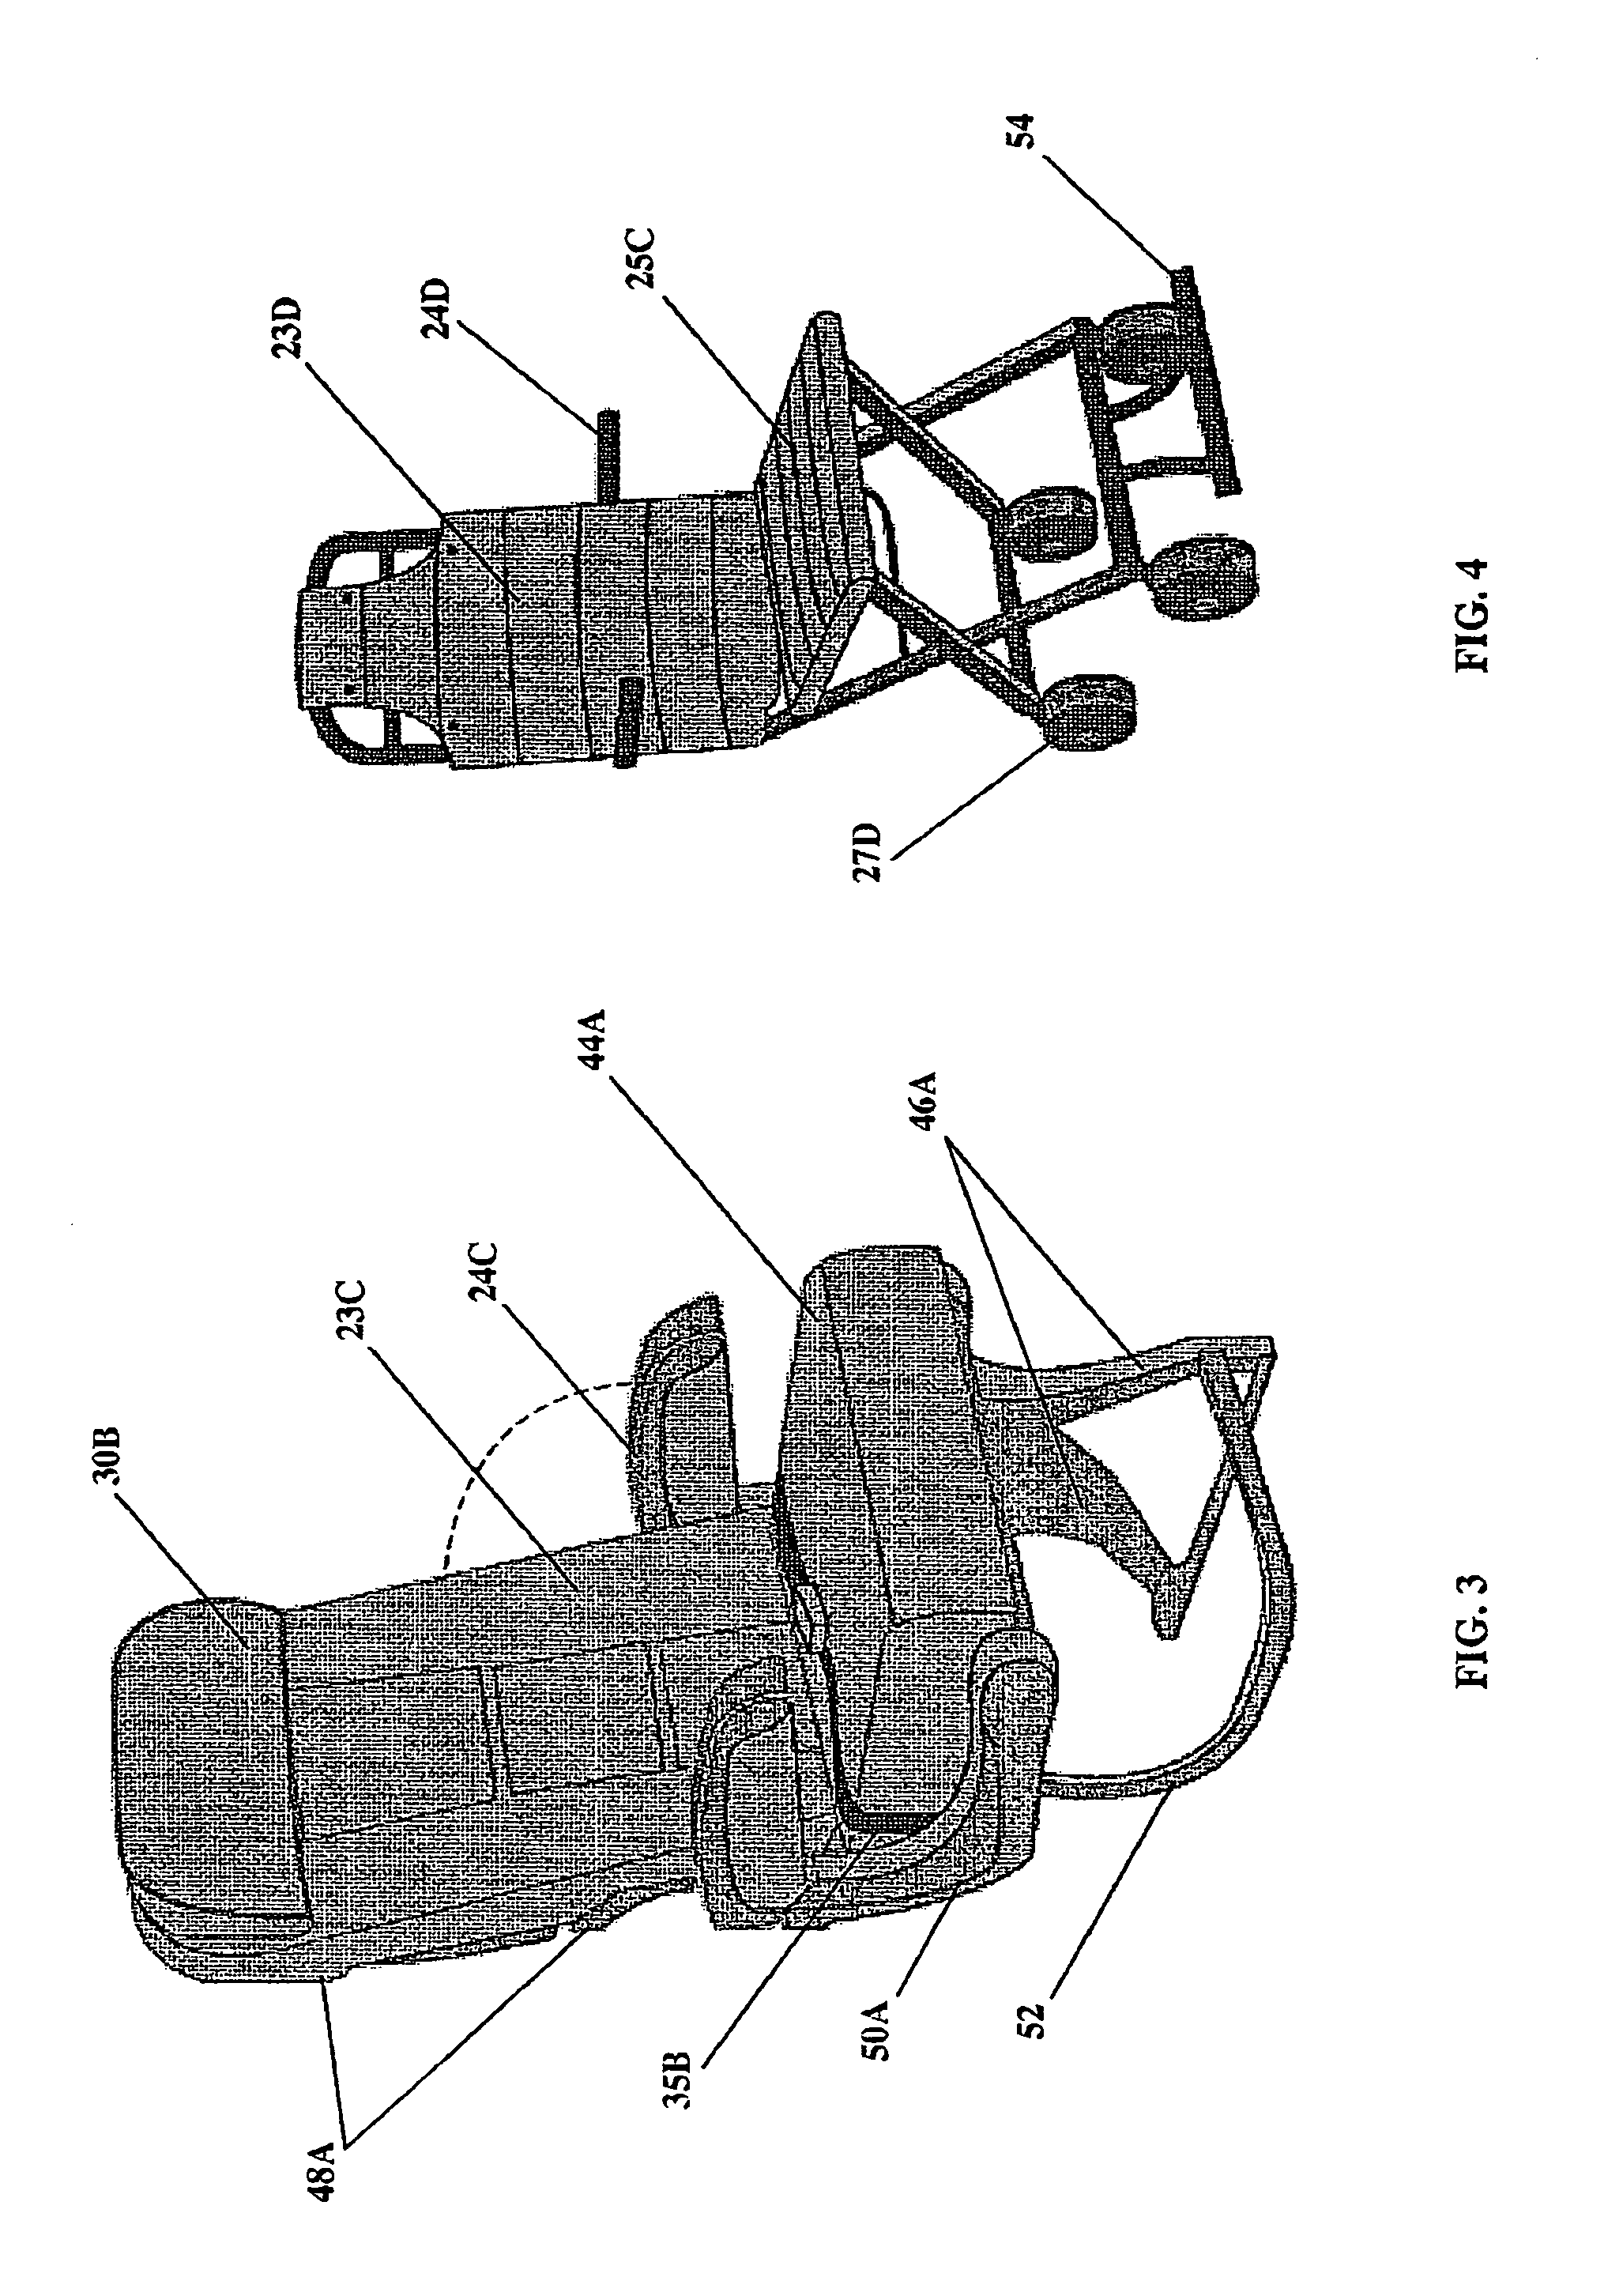 System and method for integrating handicapped accessible seats into aircraft interior configurations